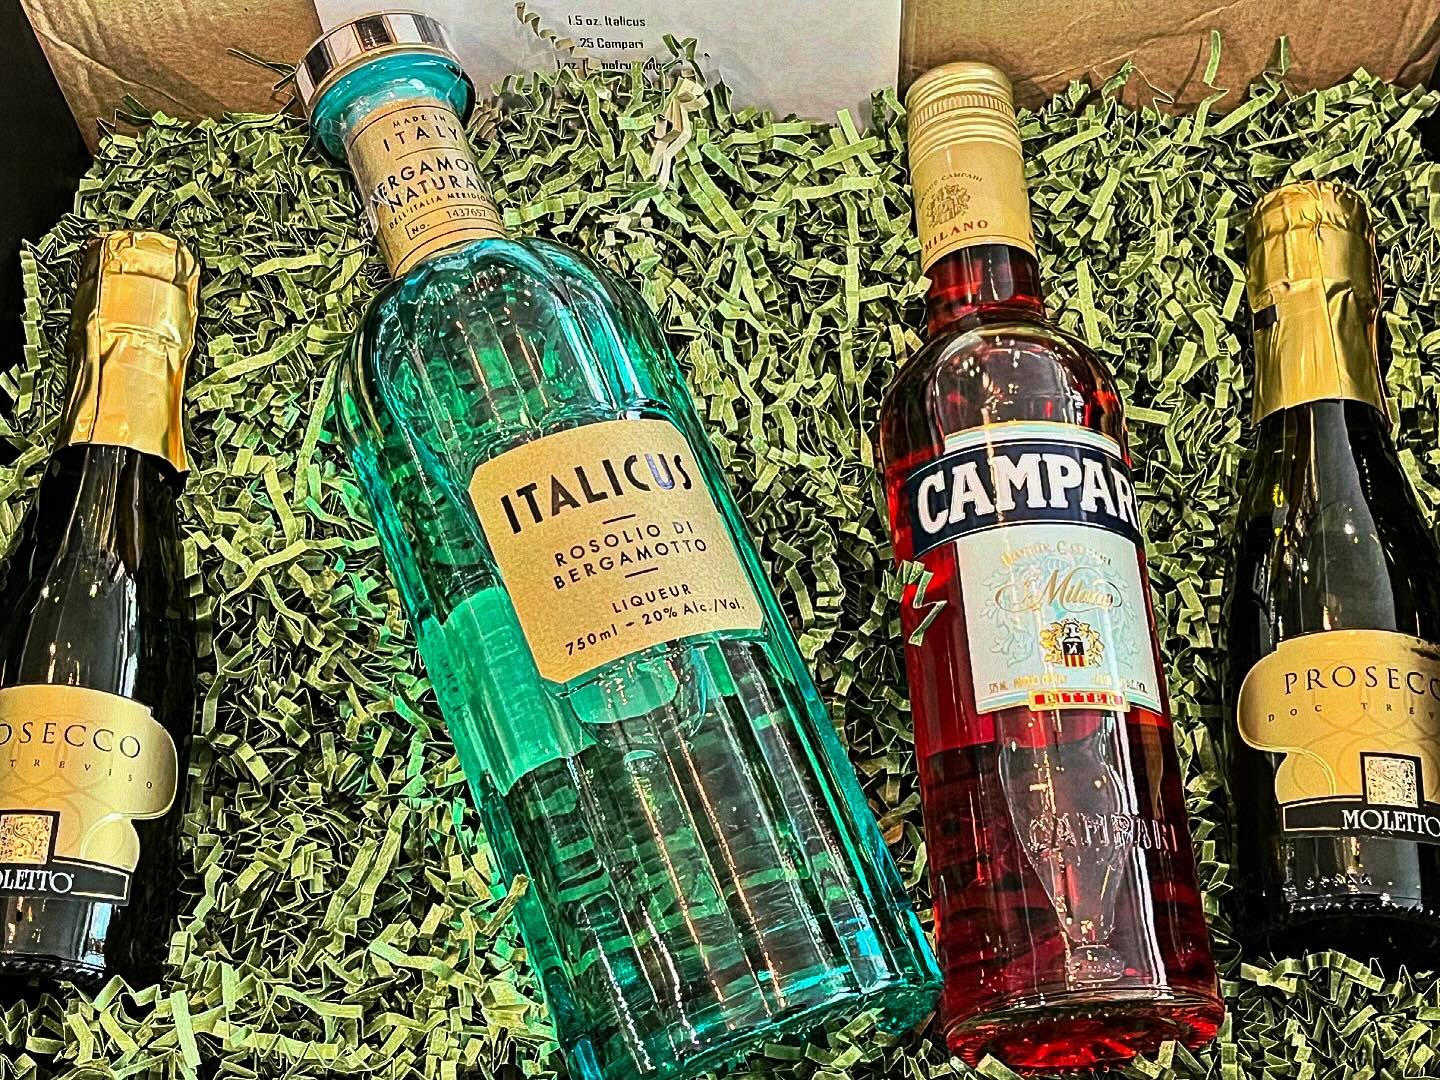 Our two newest Intox Boxes perfect for Mothers Day.
Bergamot &amp; Grapefruit Spritz featuring @italicusrdb and a Passionfruit Aperol Spritz.  Pick up this perfect gift in store or purchase online.  Cheers!
~
~
#cocktailkits #spritz #mothersdaygift #